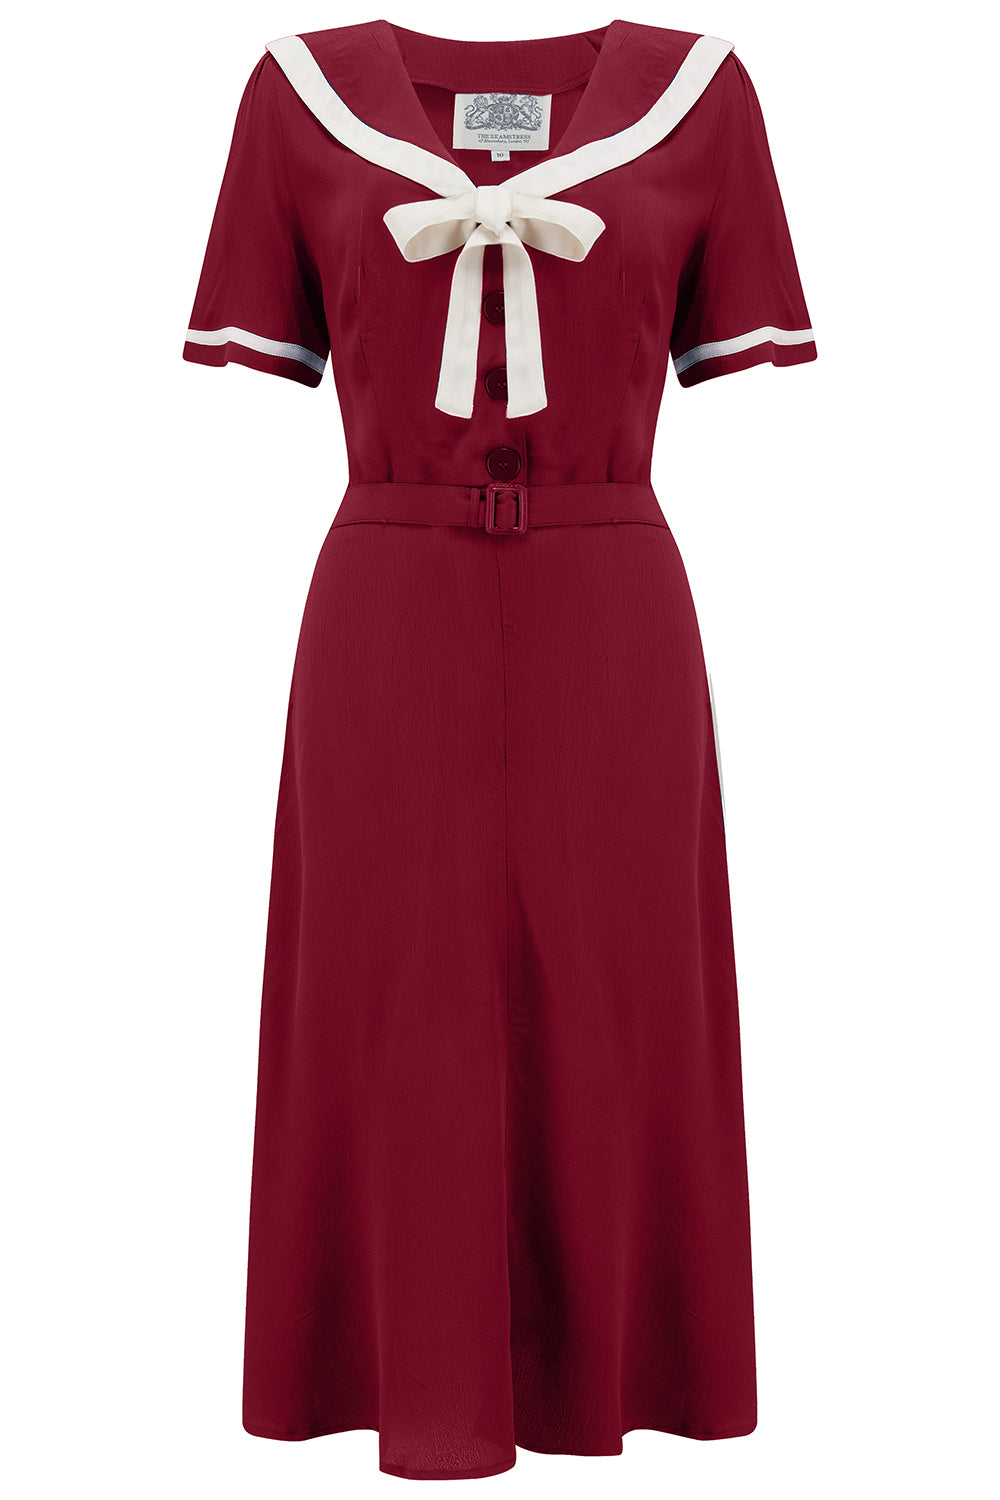 1940s Clothing & 40s Fashion or Women